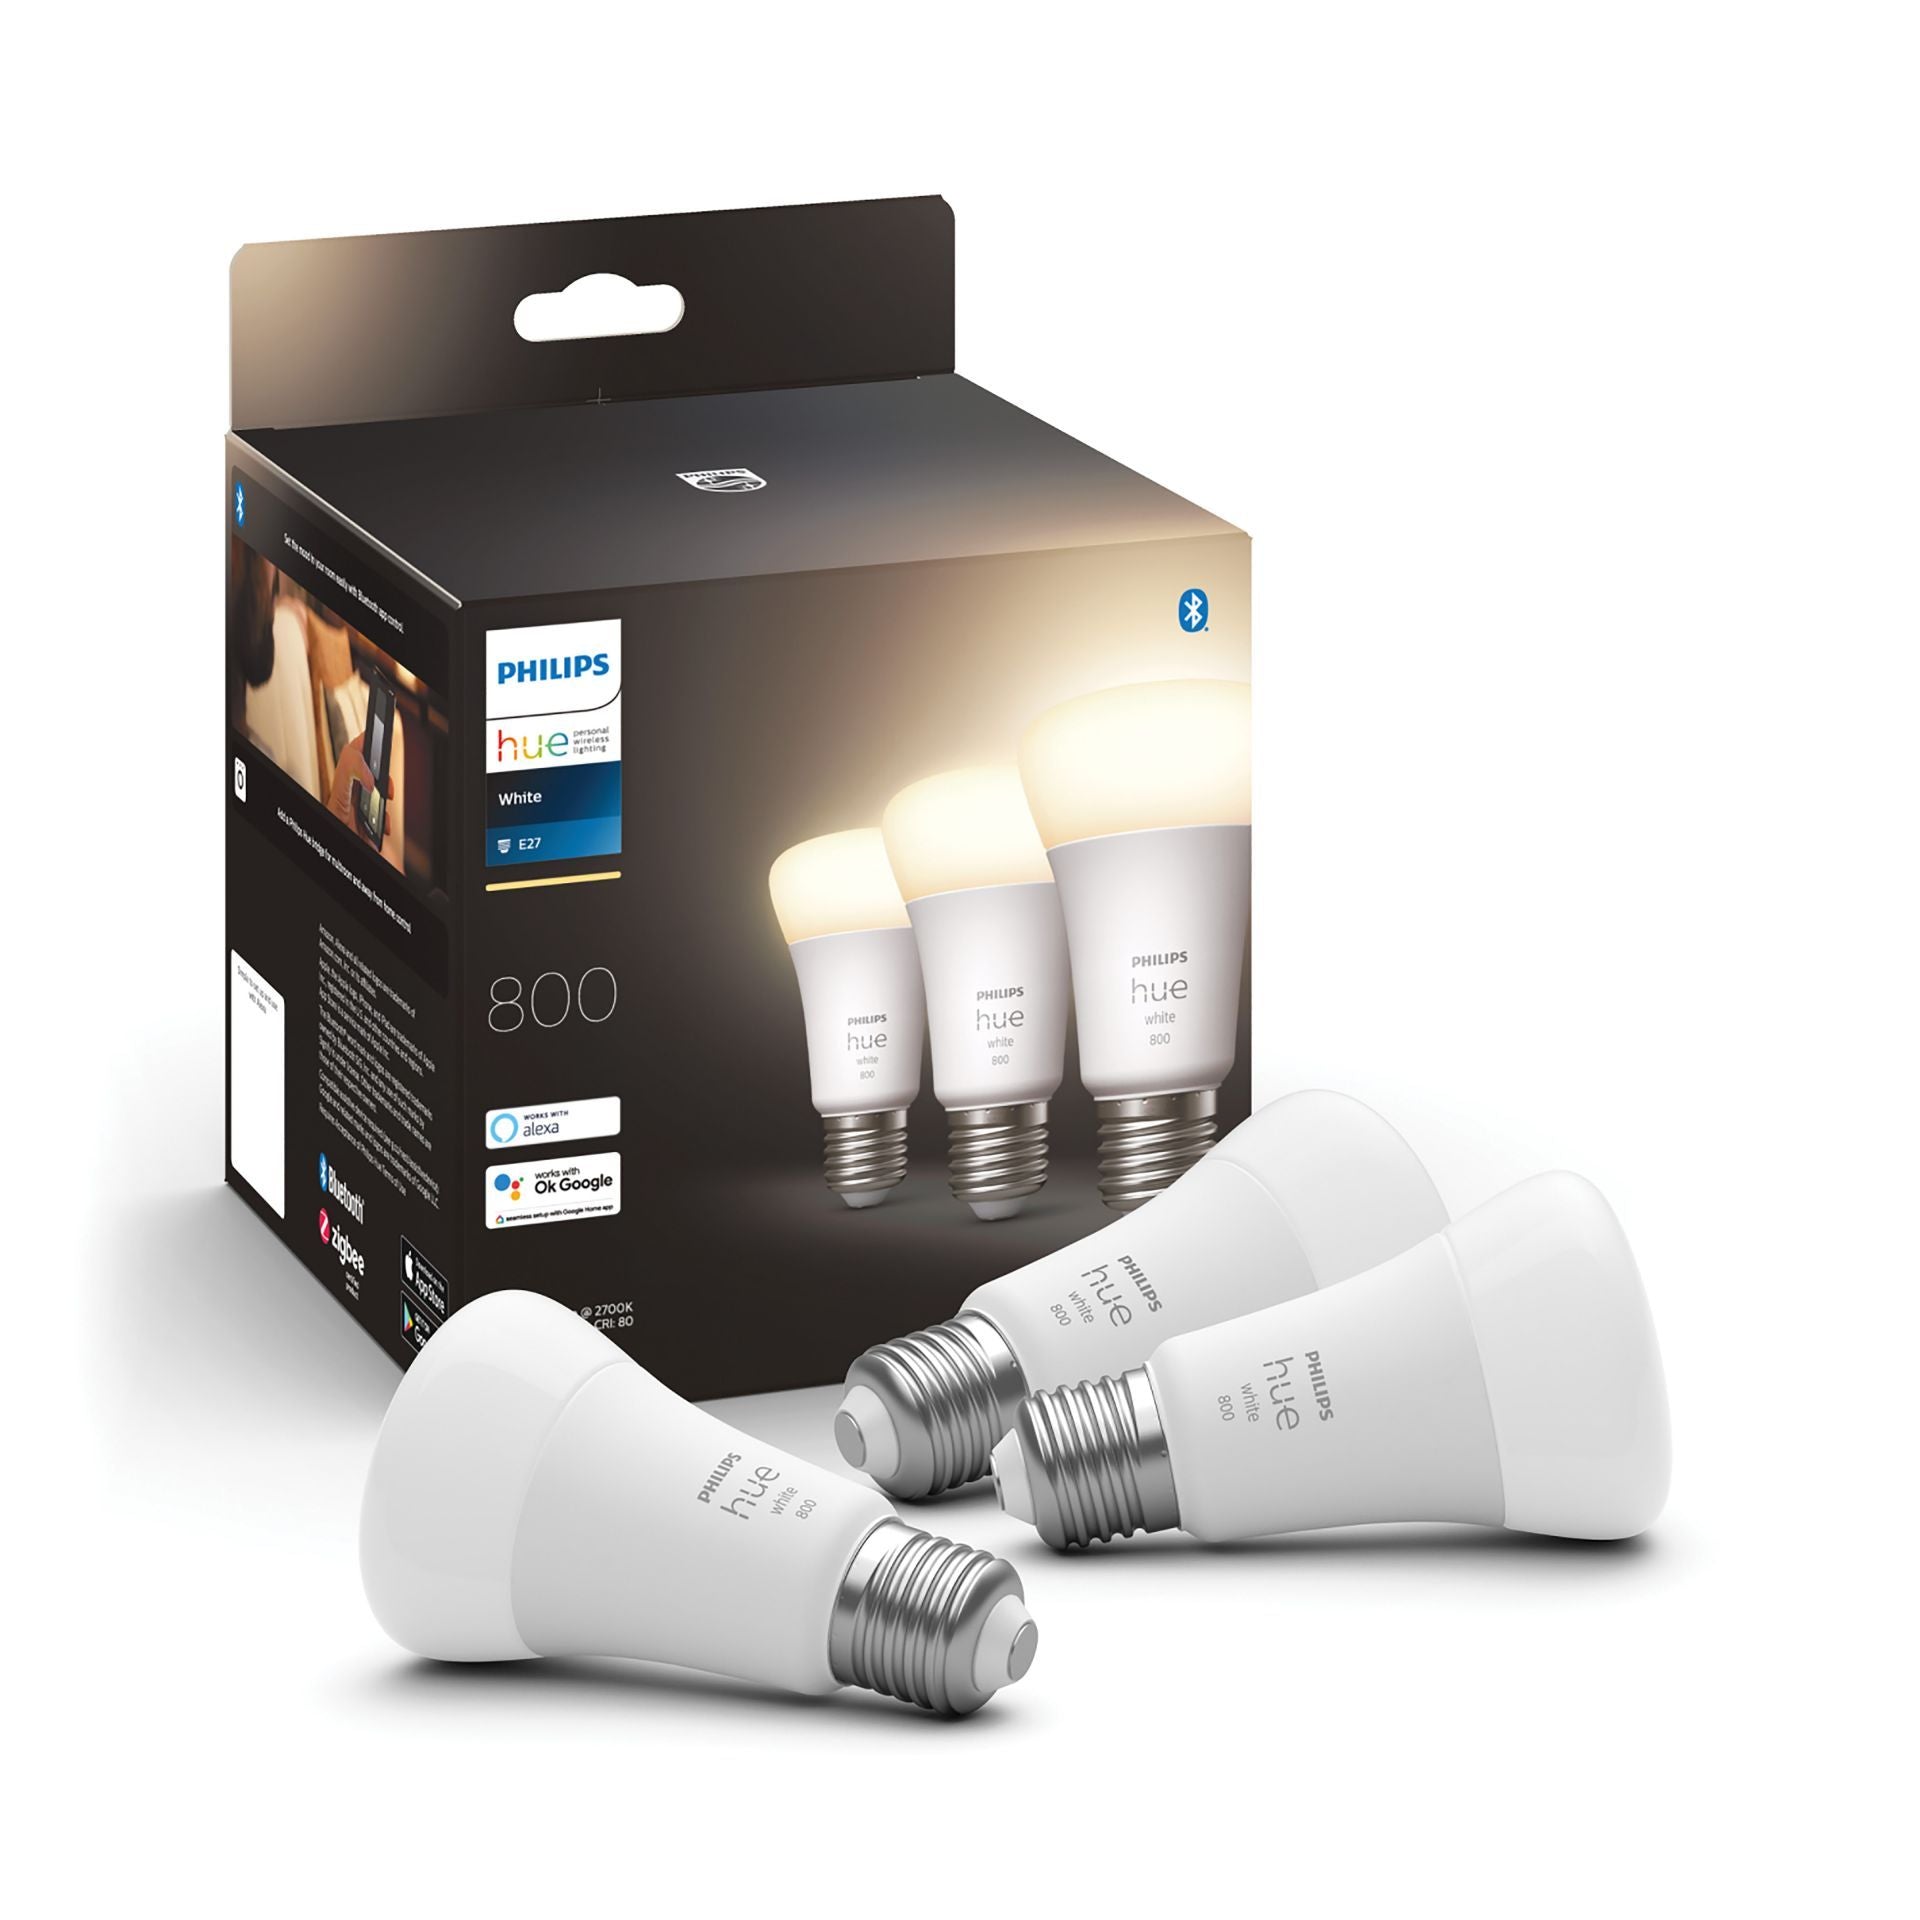 Philips Hue - warmwit licht - 3-pack - E27 - 800lm